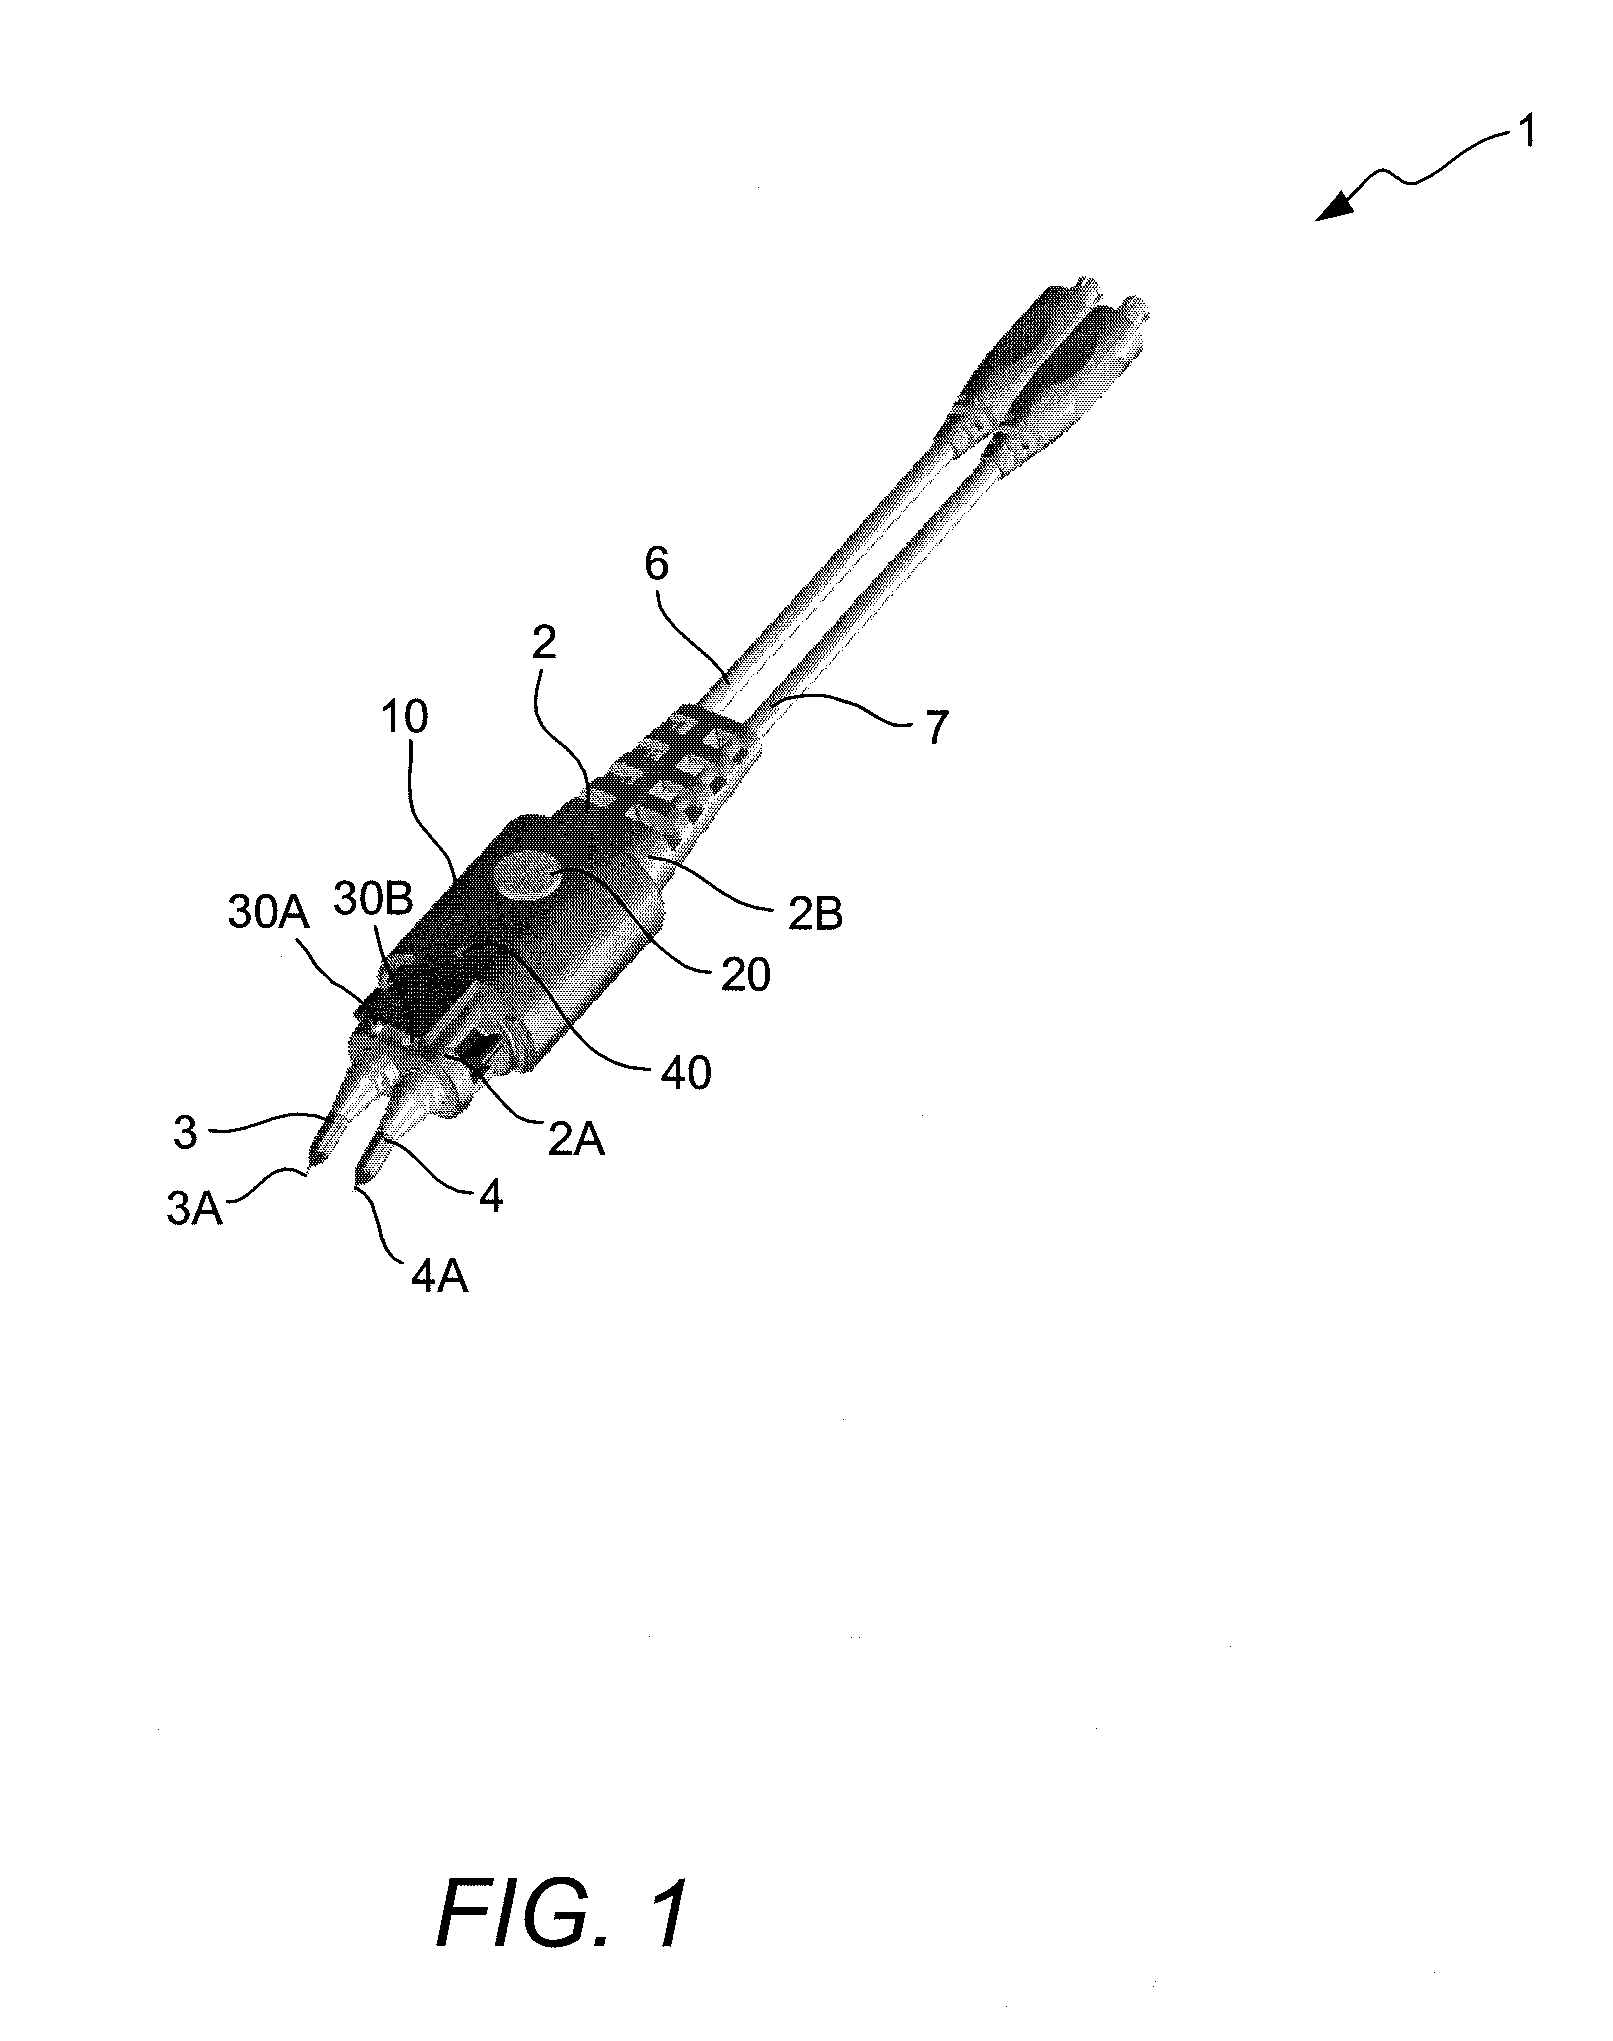 Probe device having a clip-on wireless system for extending probe tip functionality